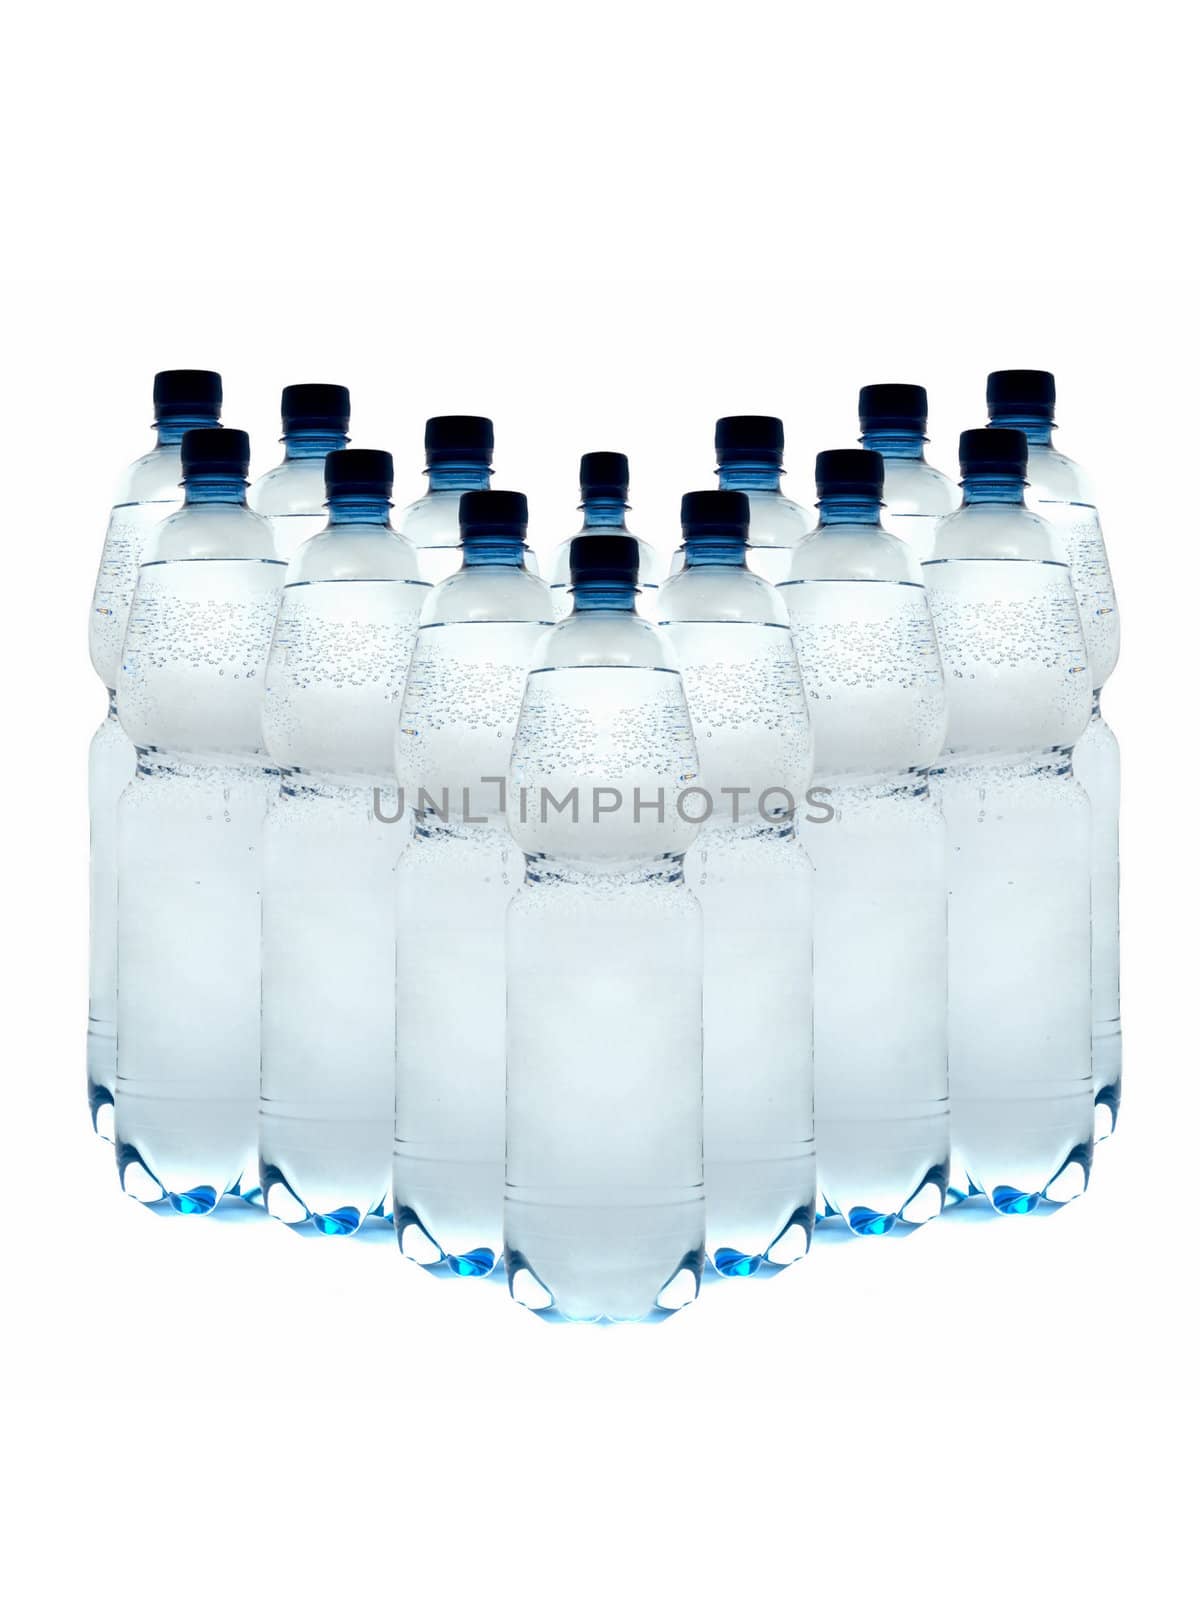 plastic bottles of mineral water, laid out in a row on a white background.